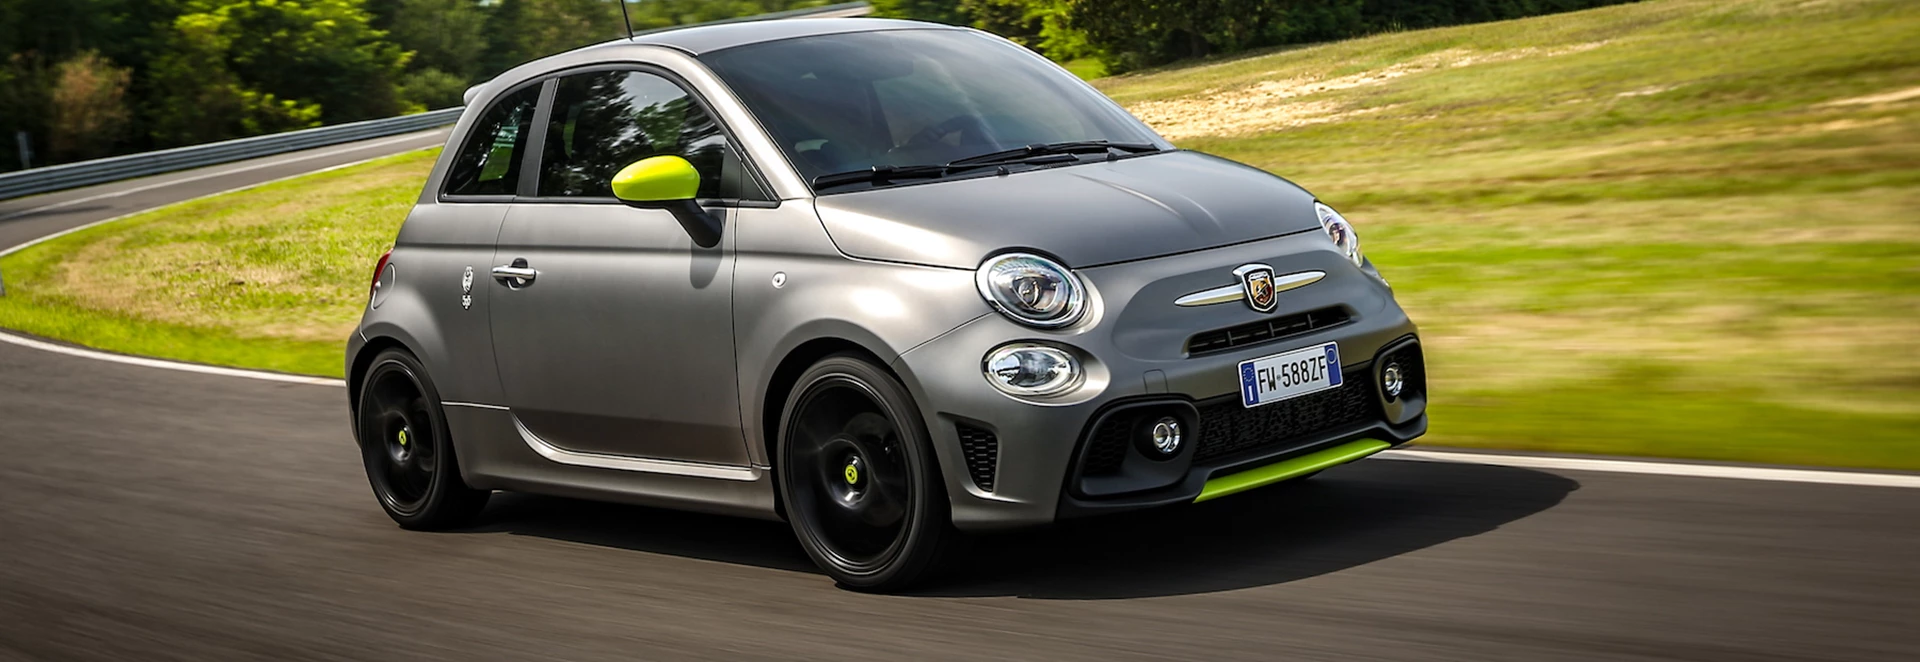 Buyer’s guide to the Abarth 595